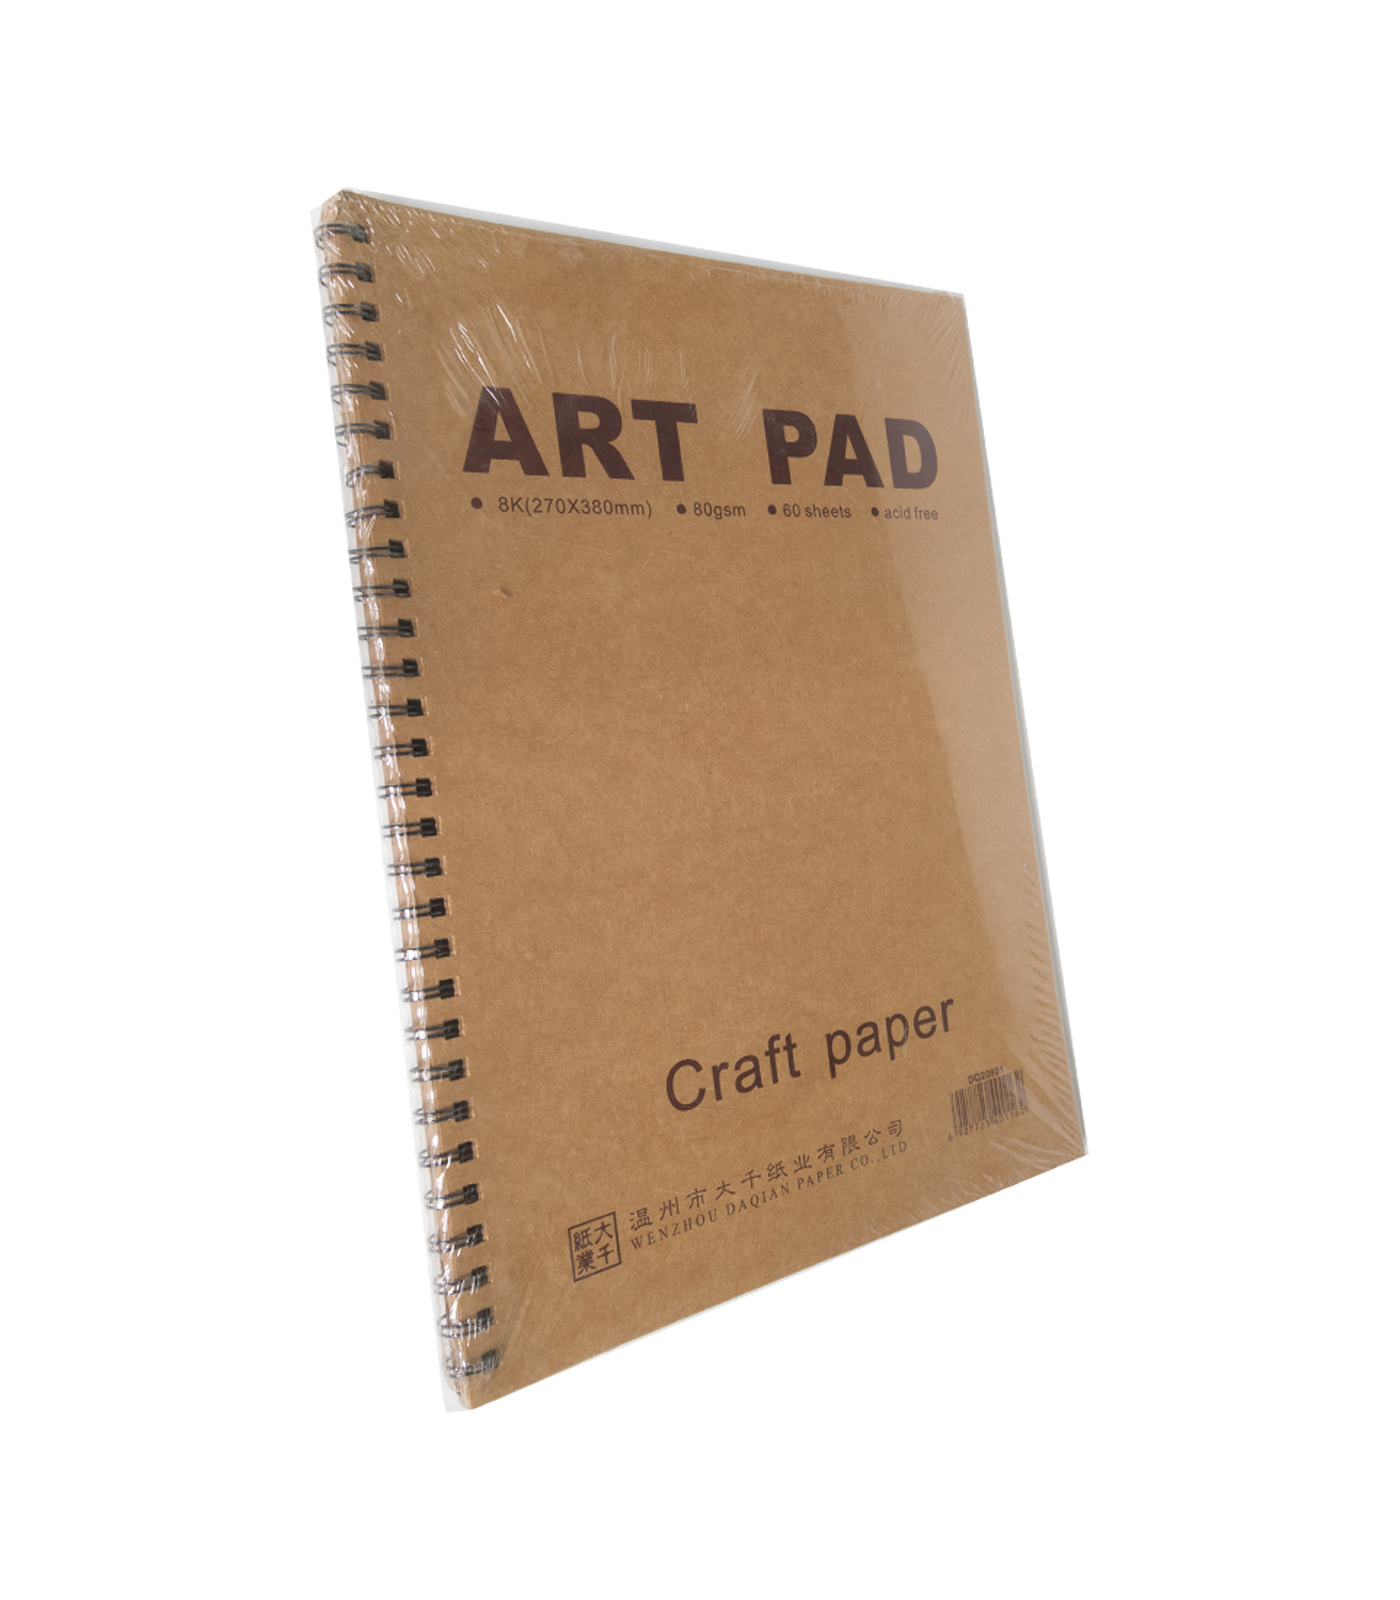 Sketch of Craft paper - A4 - 60 sheets